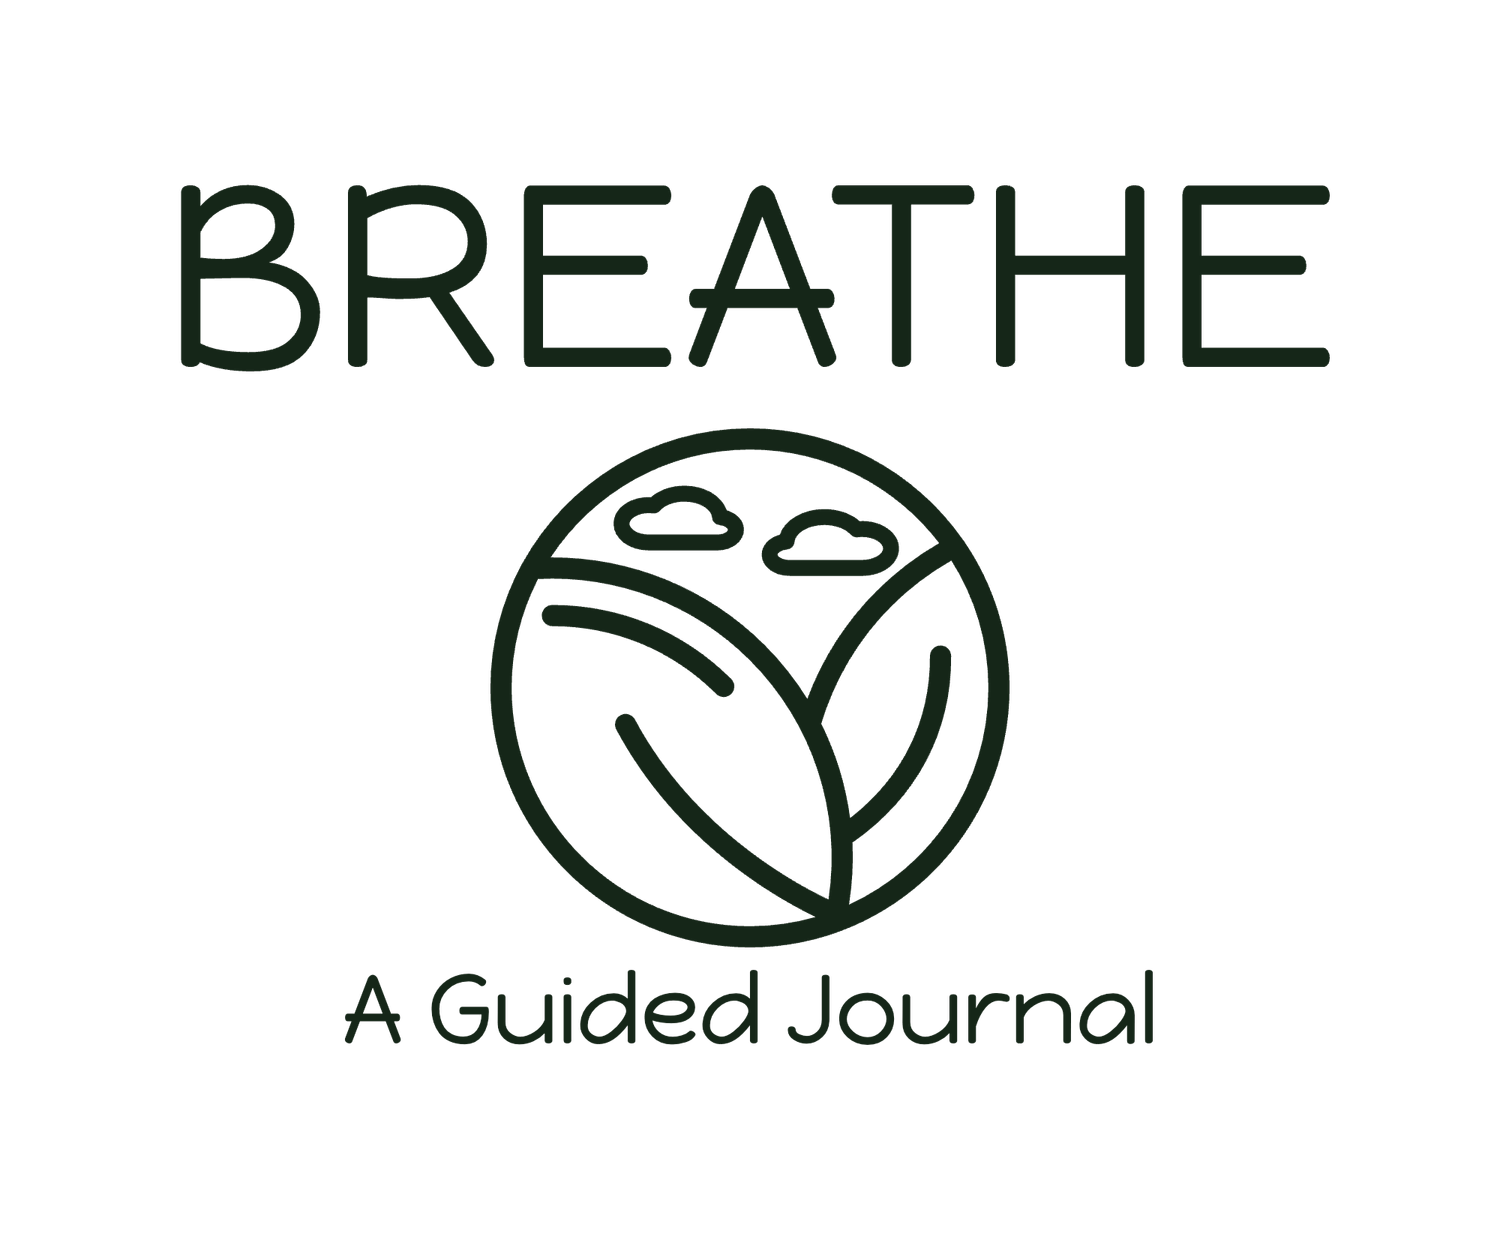 BREATHE: a Guided Journal